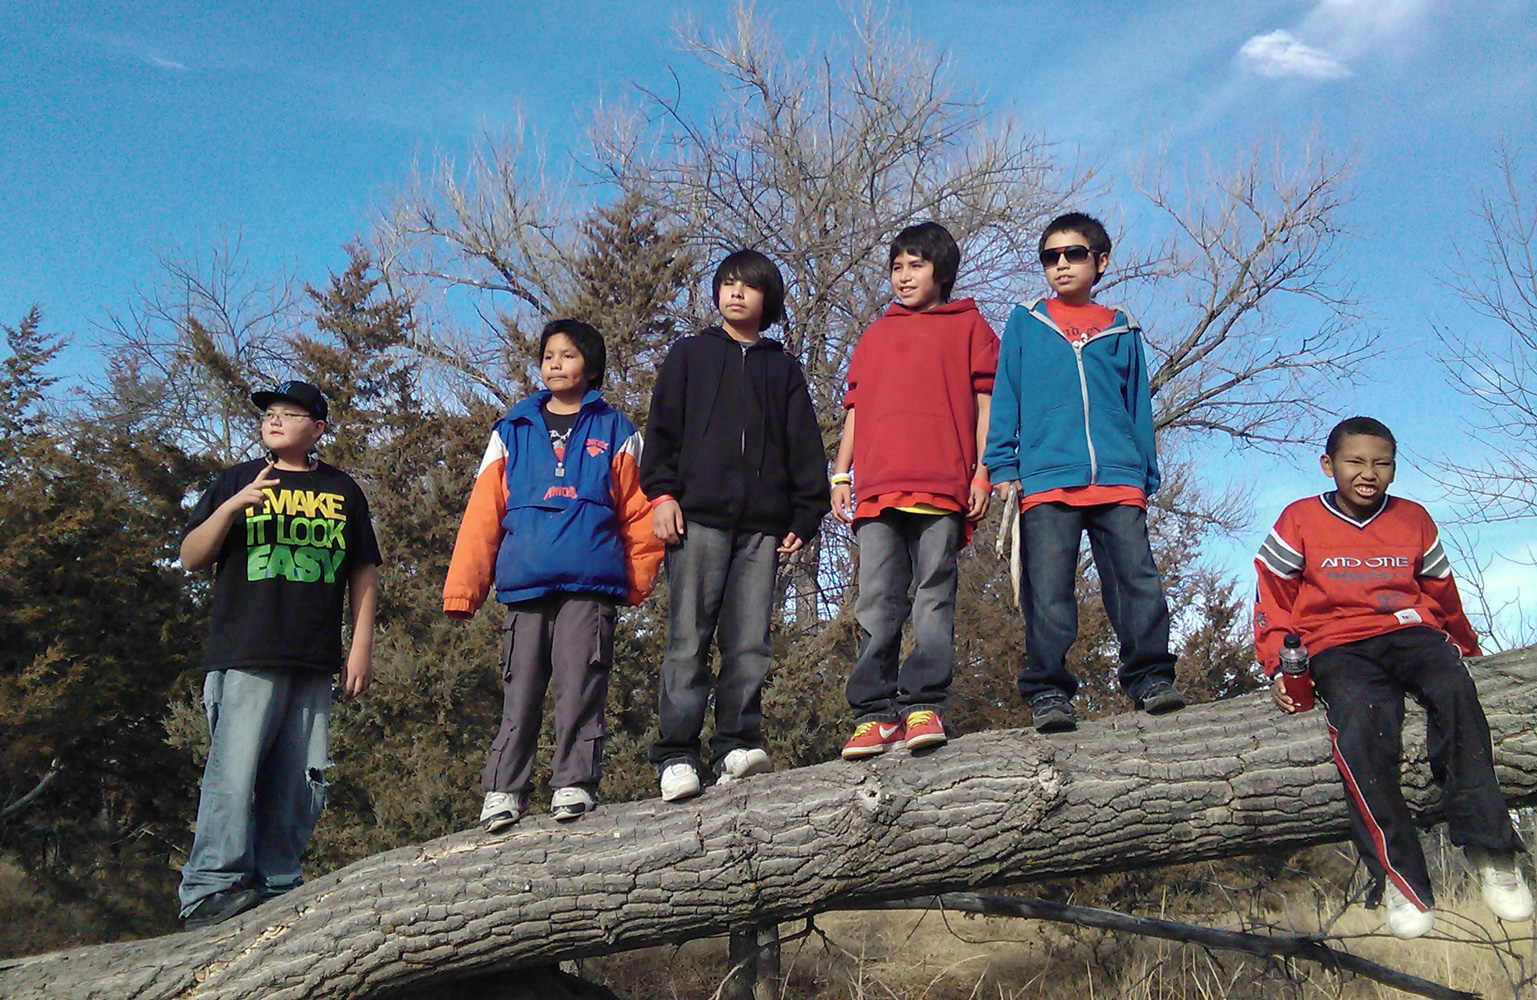 Each year on their hike, the boys stop at the same tree for a picture. 